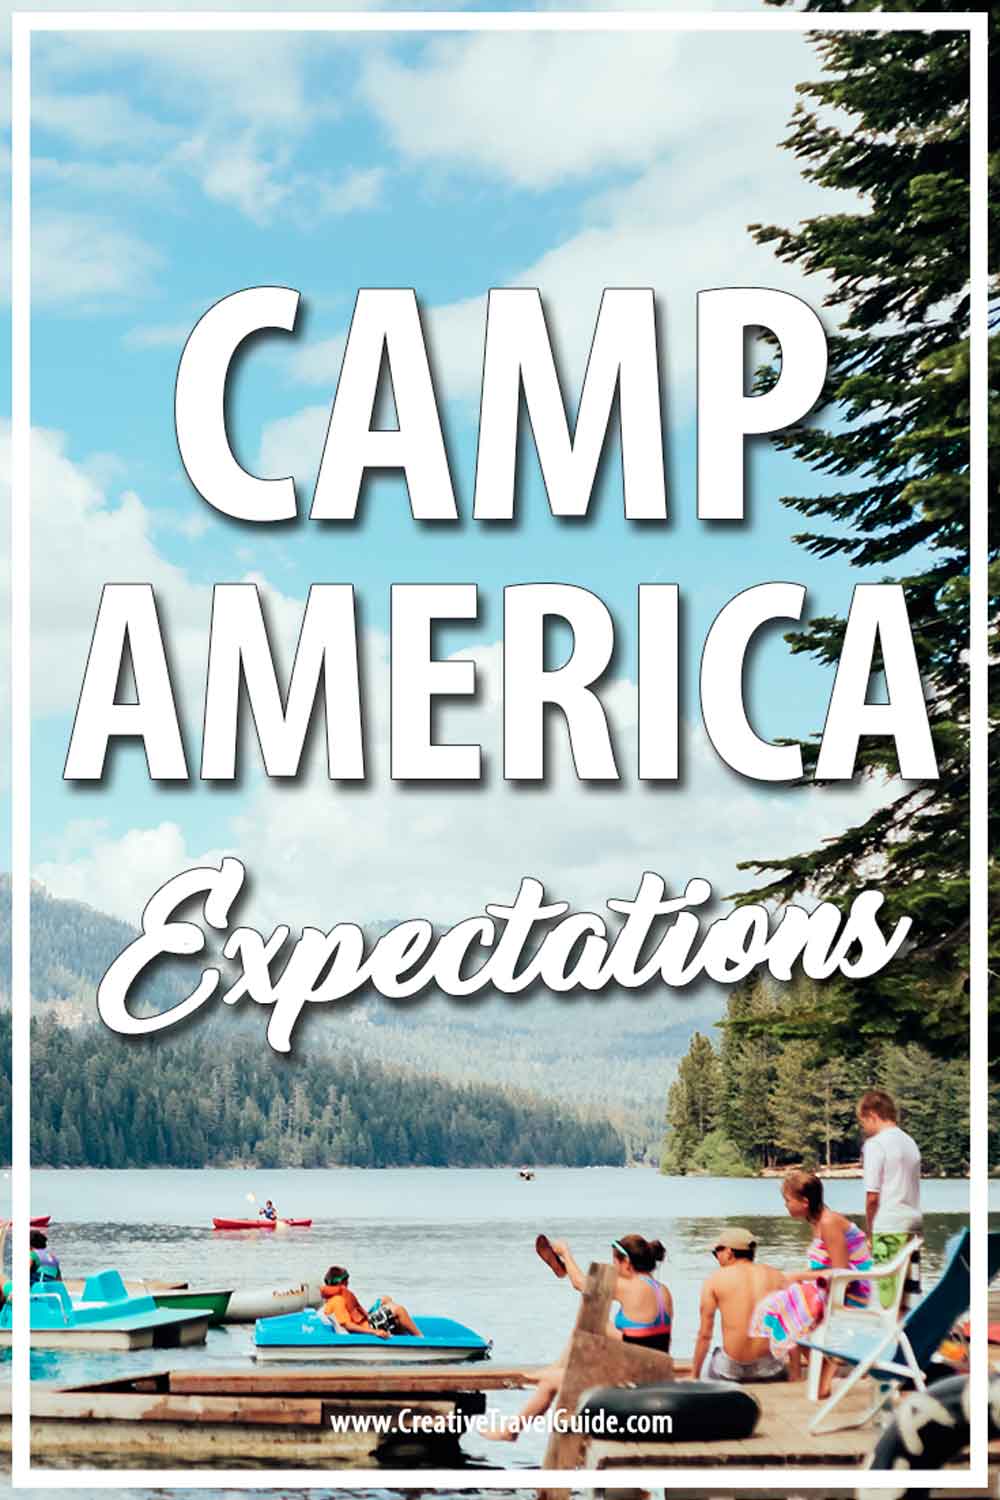 Camp America expectations